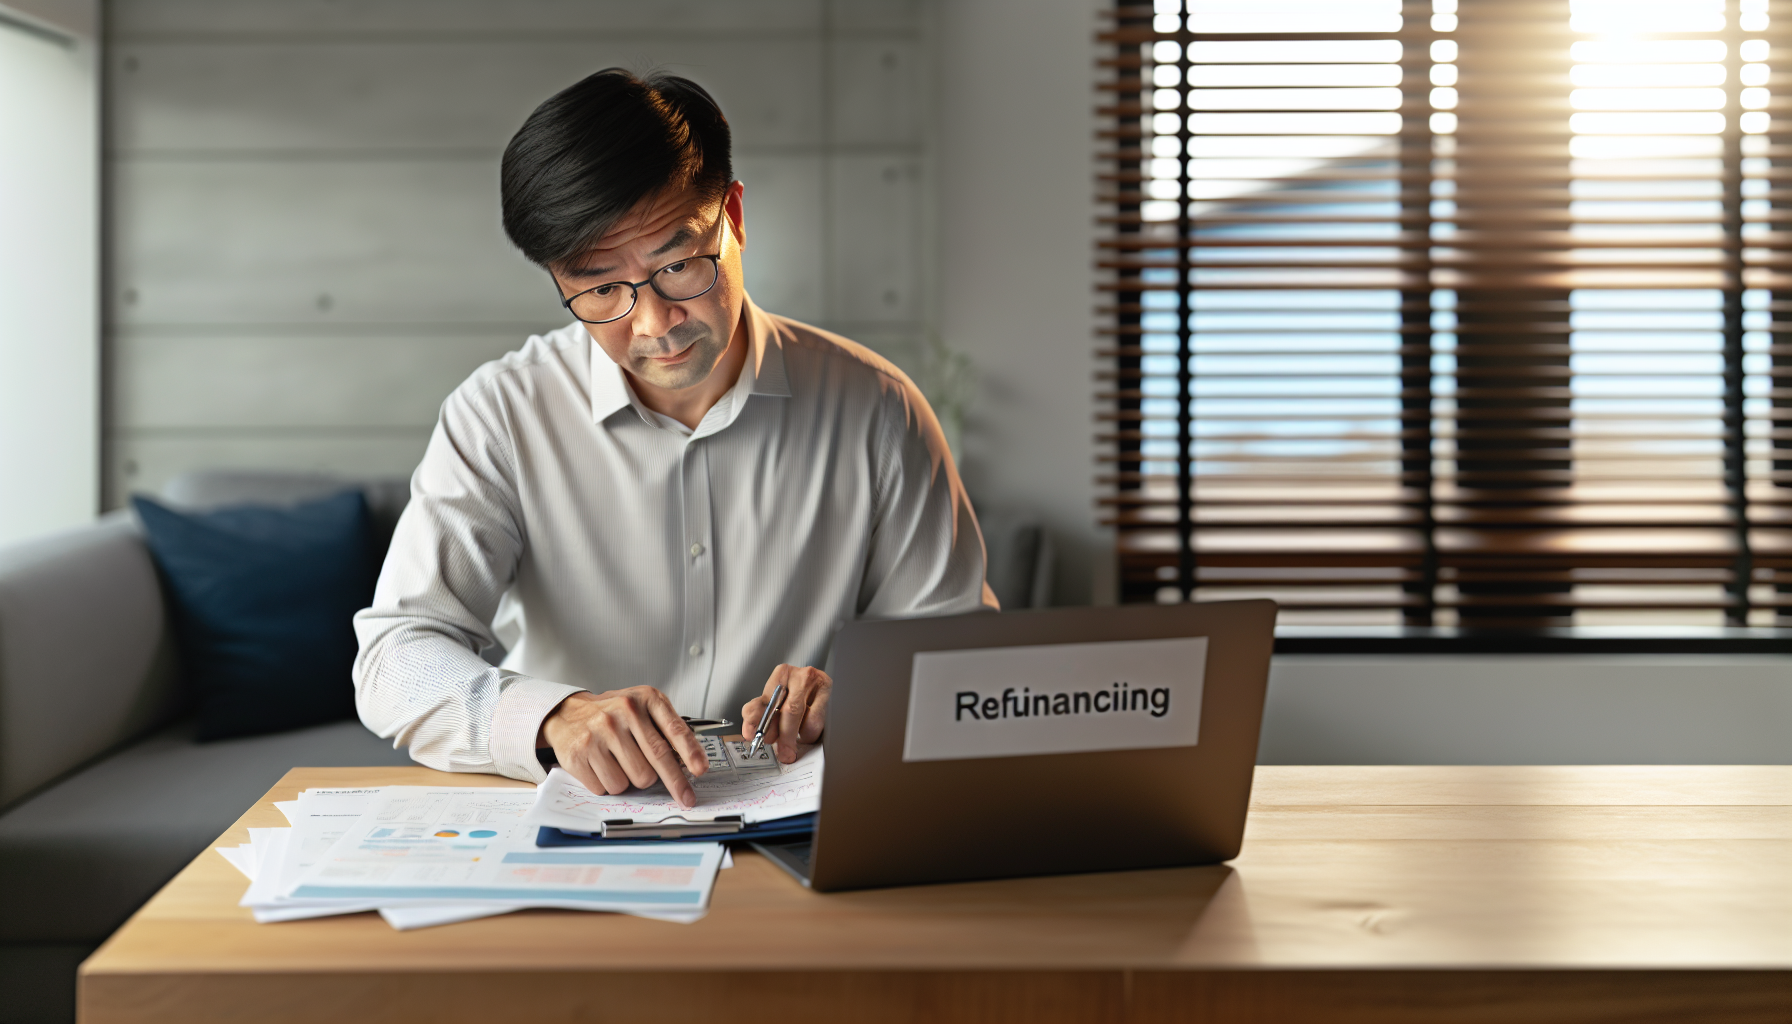 A person reviewing financial statements for refinancing